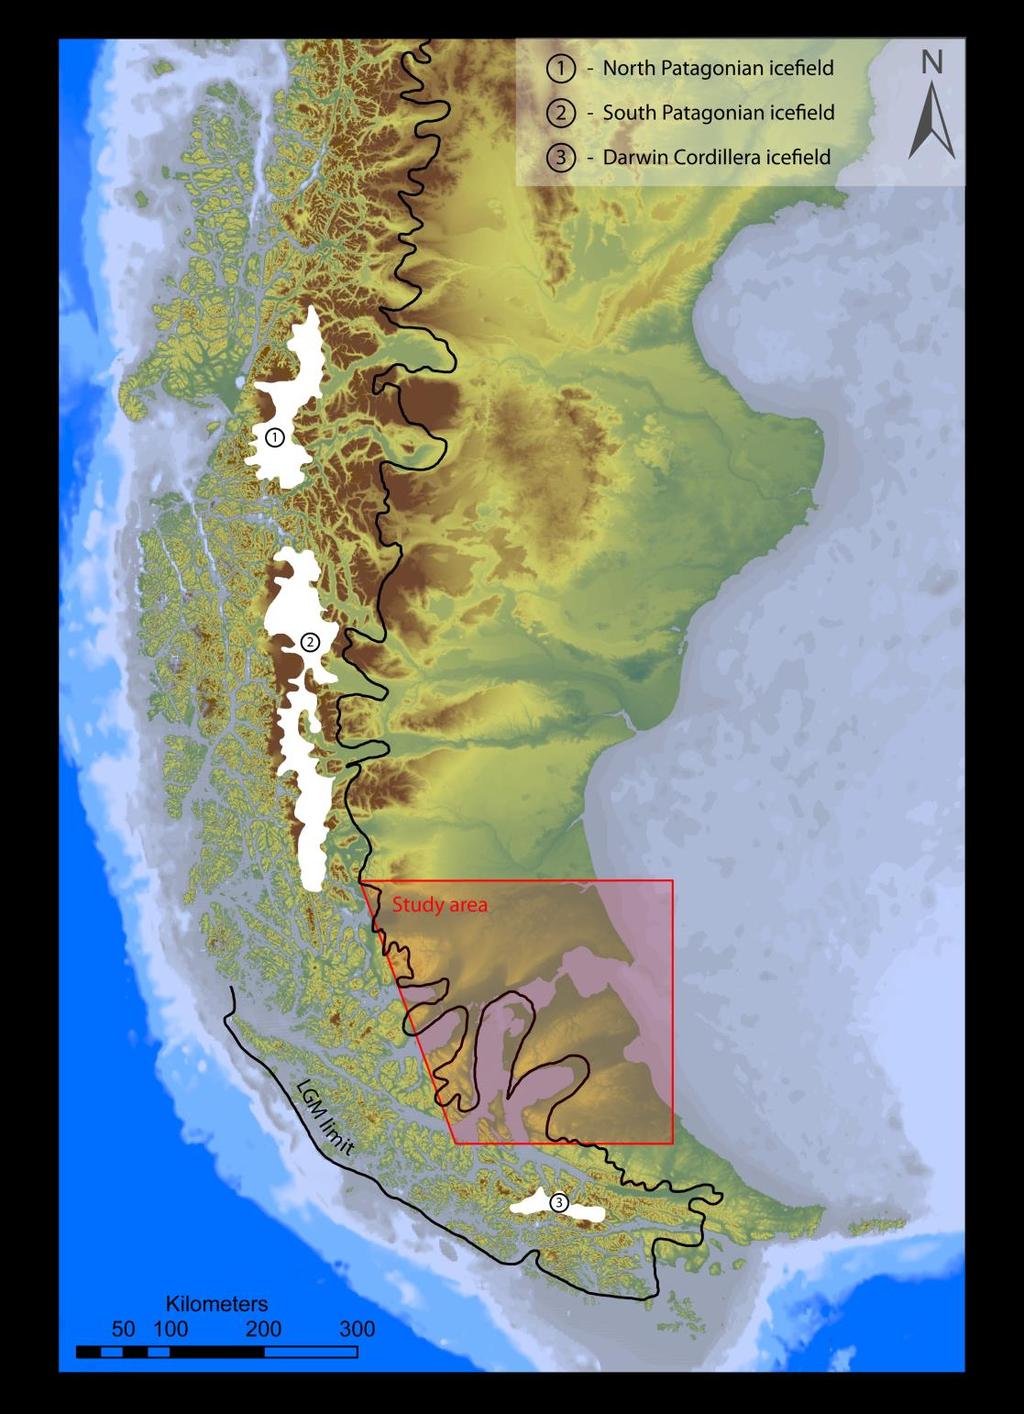 655 656 657 658 Figure 1. Location of the study area in southernmost Patagonia (topography shown using shaded SRTM and ETOPO data).